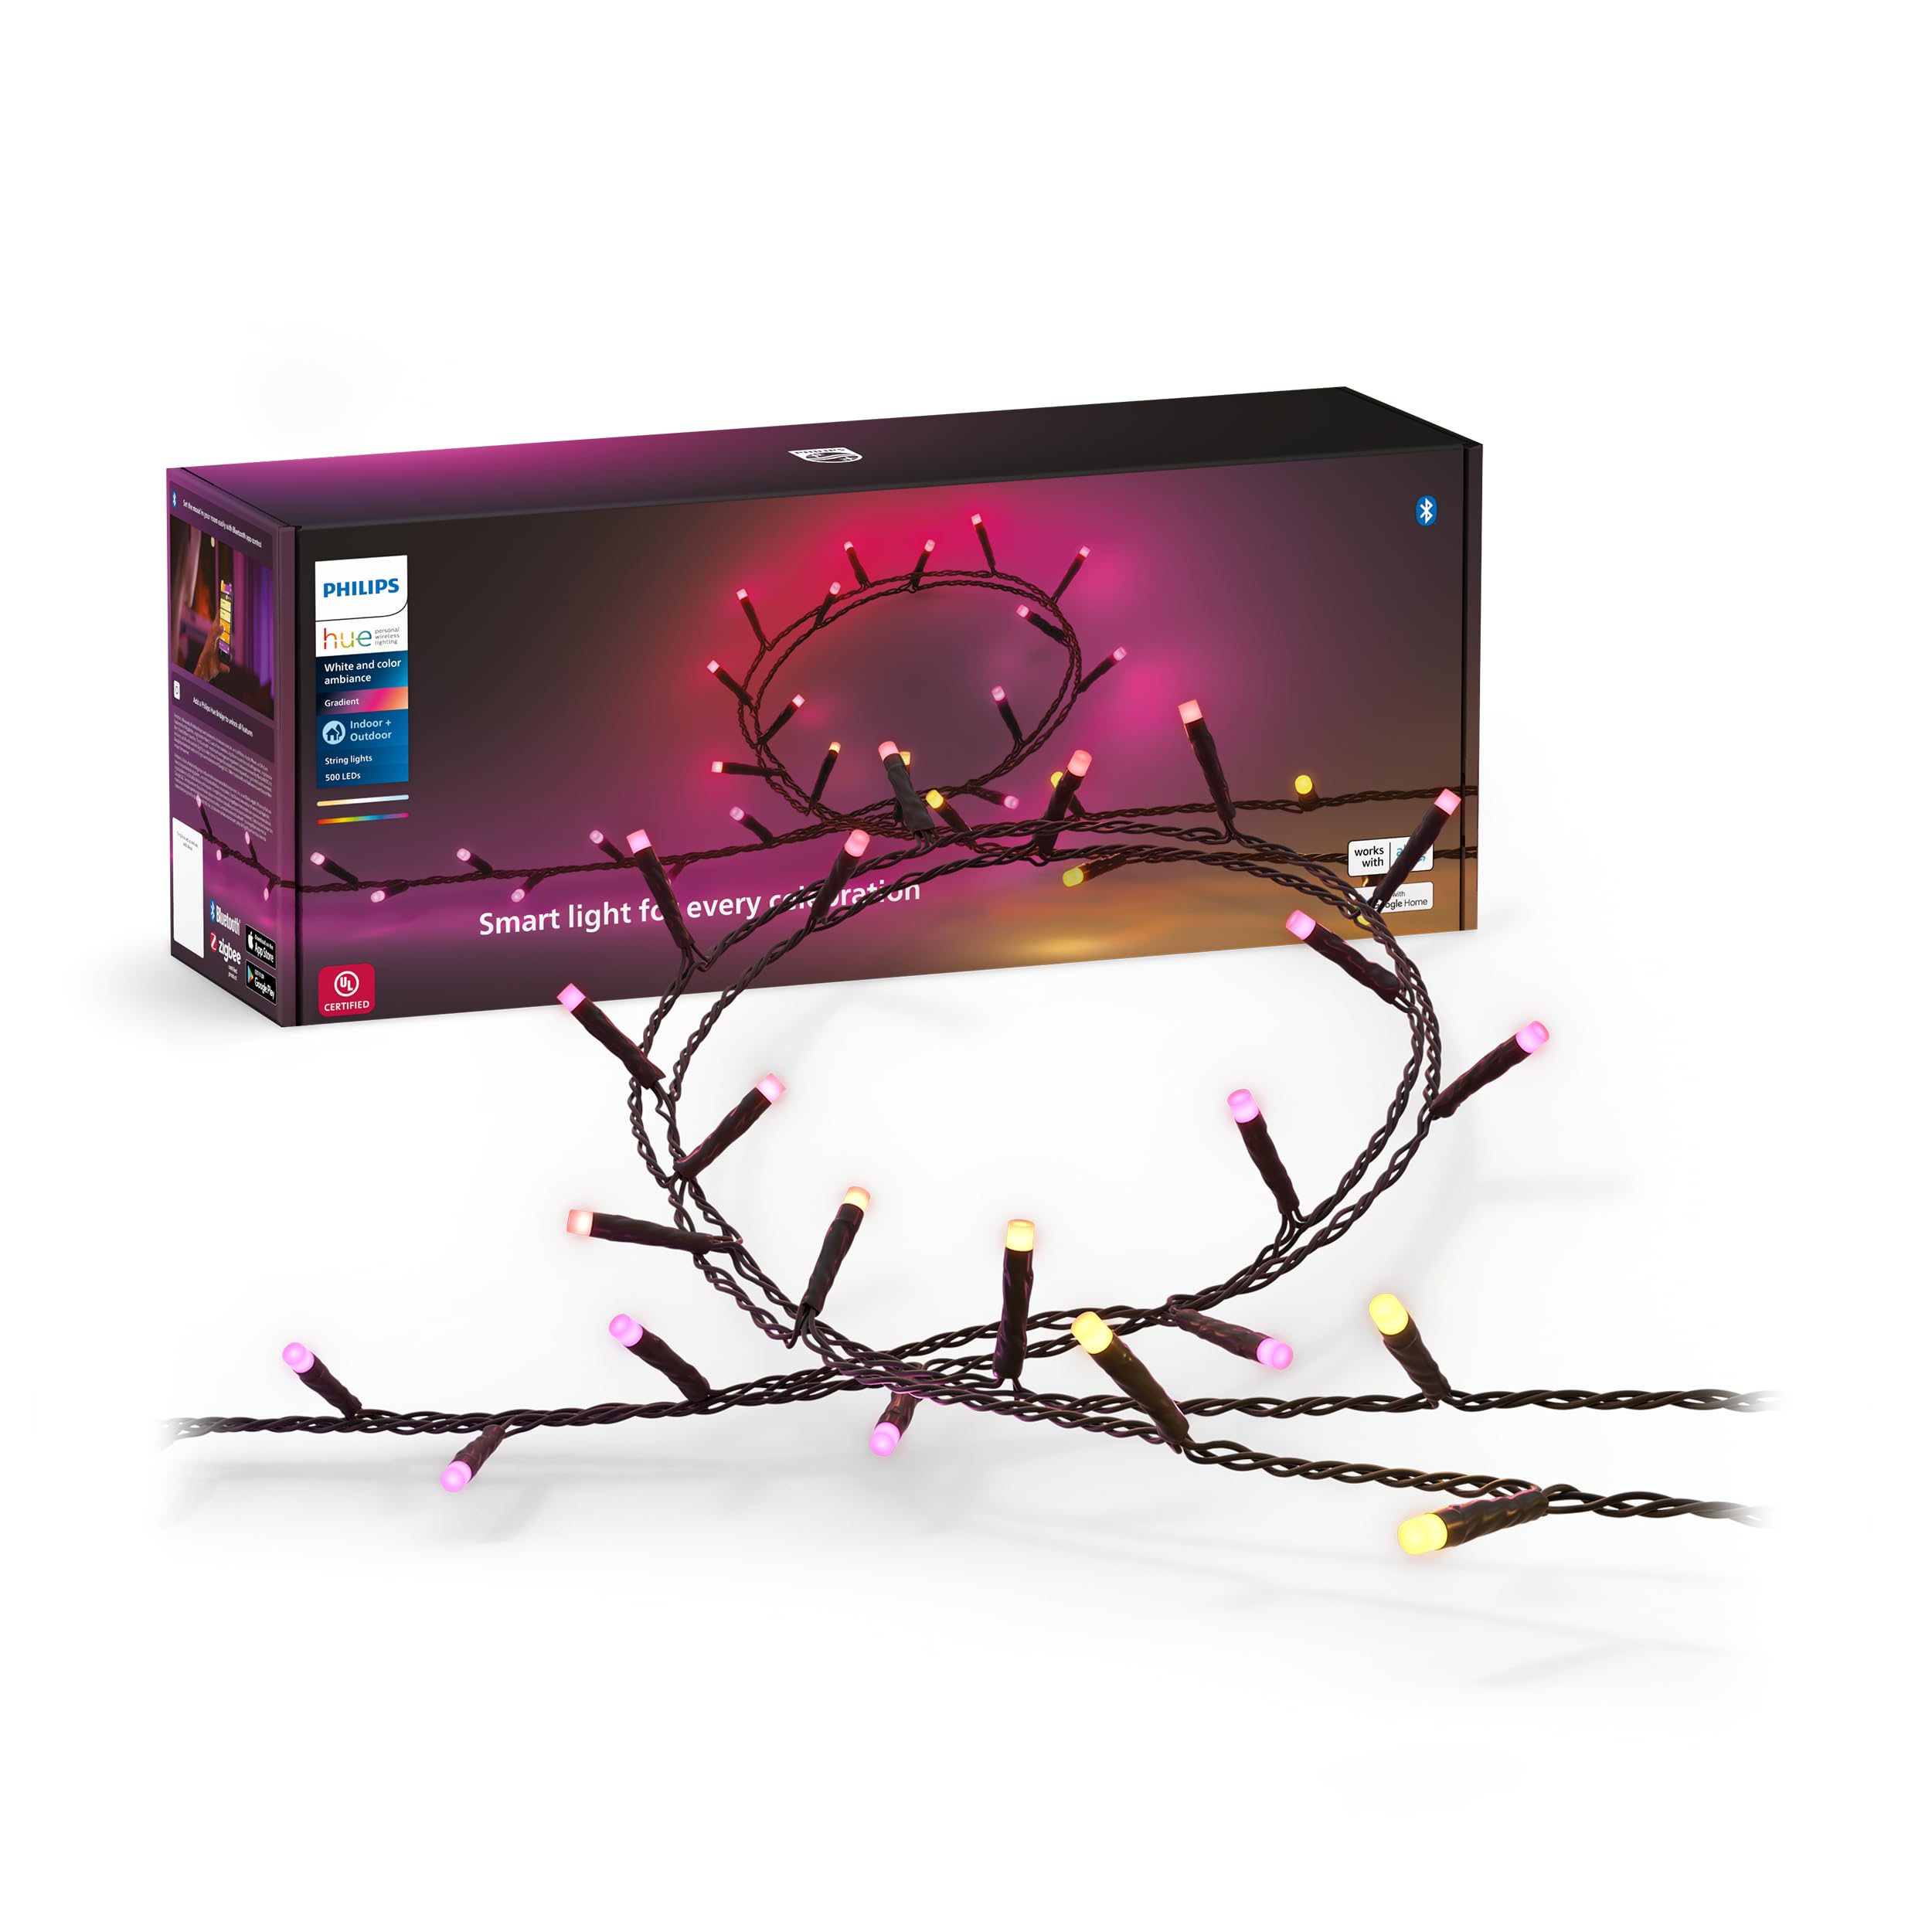 Philips Hue Christmas Festavia 130 Foot String Lights - 500 Mini White and Color Changing Smart LEDs - Waterproof - Year Round Indoor/Outdoor Decoration - Sync with Music - Works with Voice, Matter